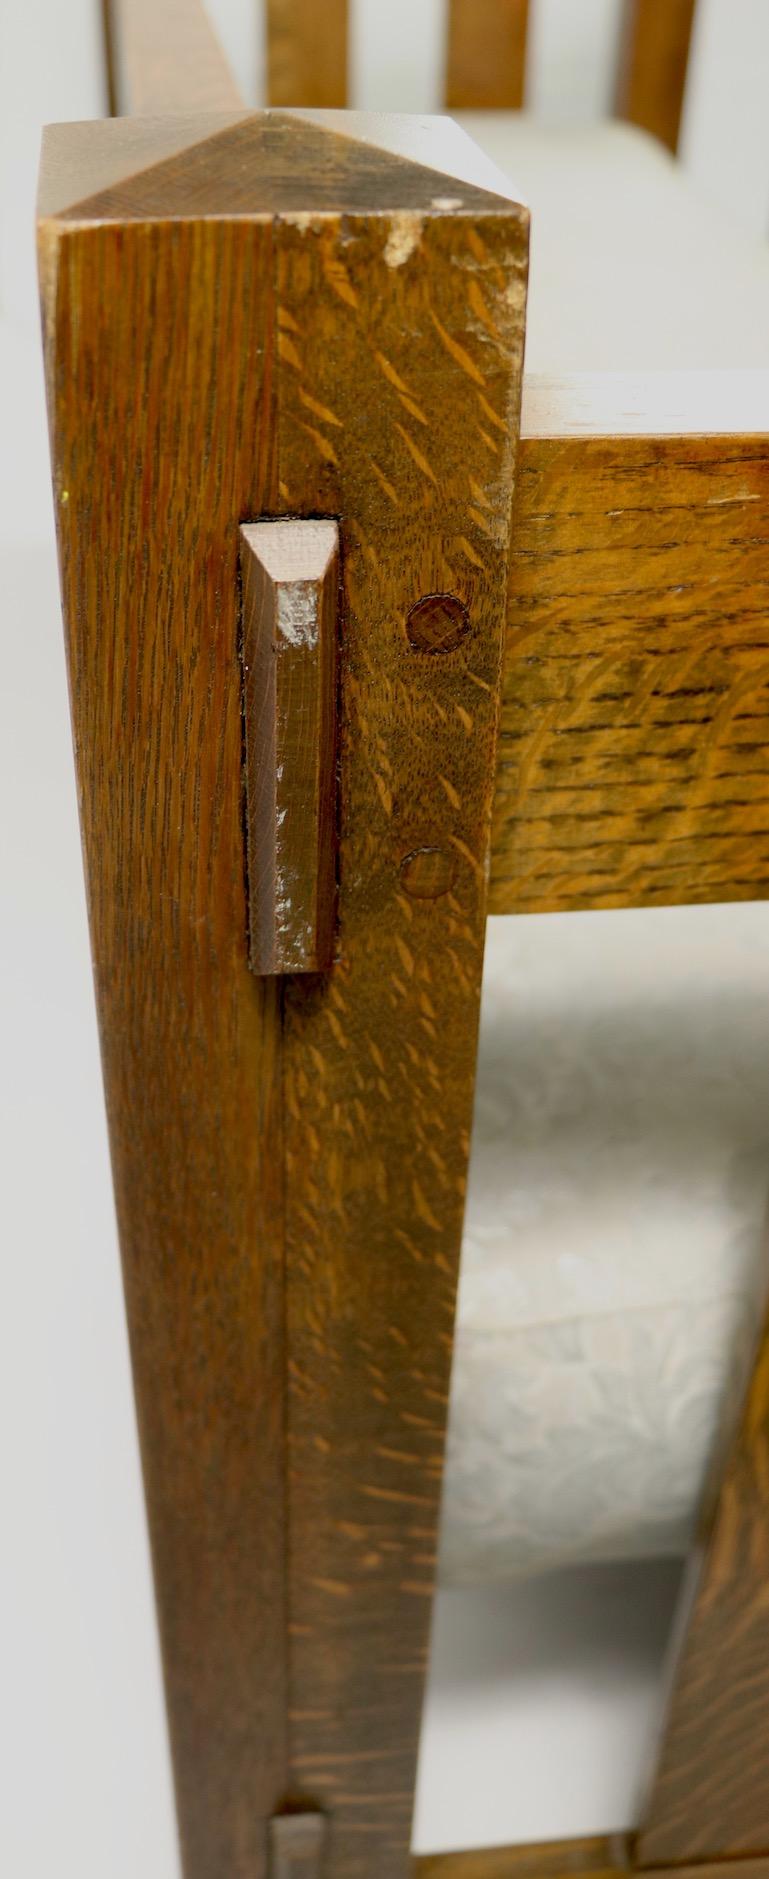 Mission Arts & Crafts Settle Attributed to Gustav Stickley 1